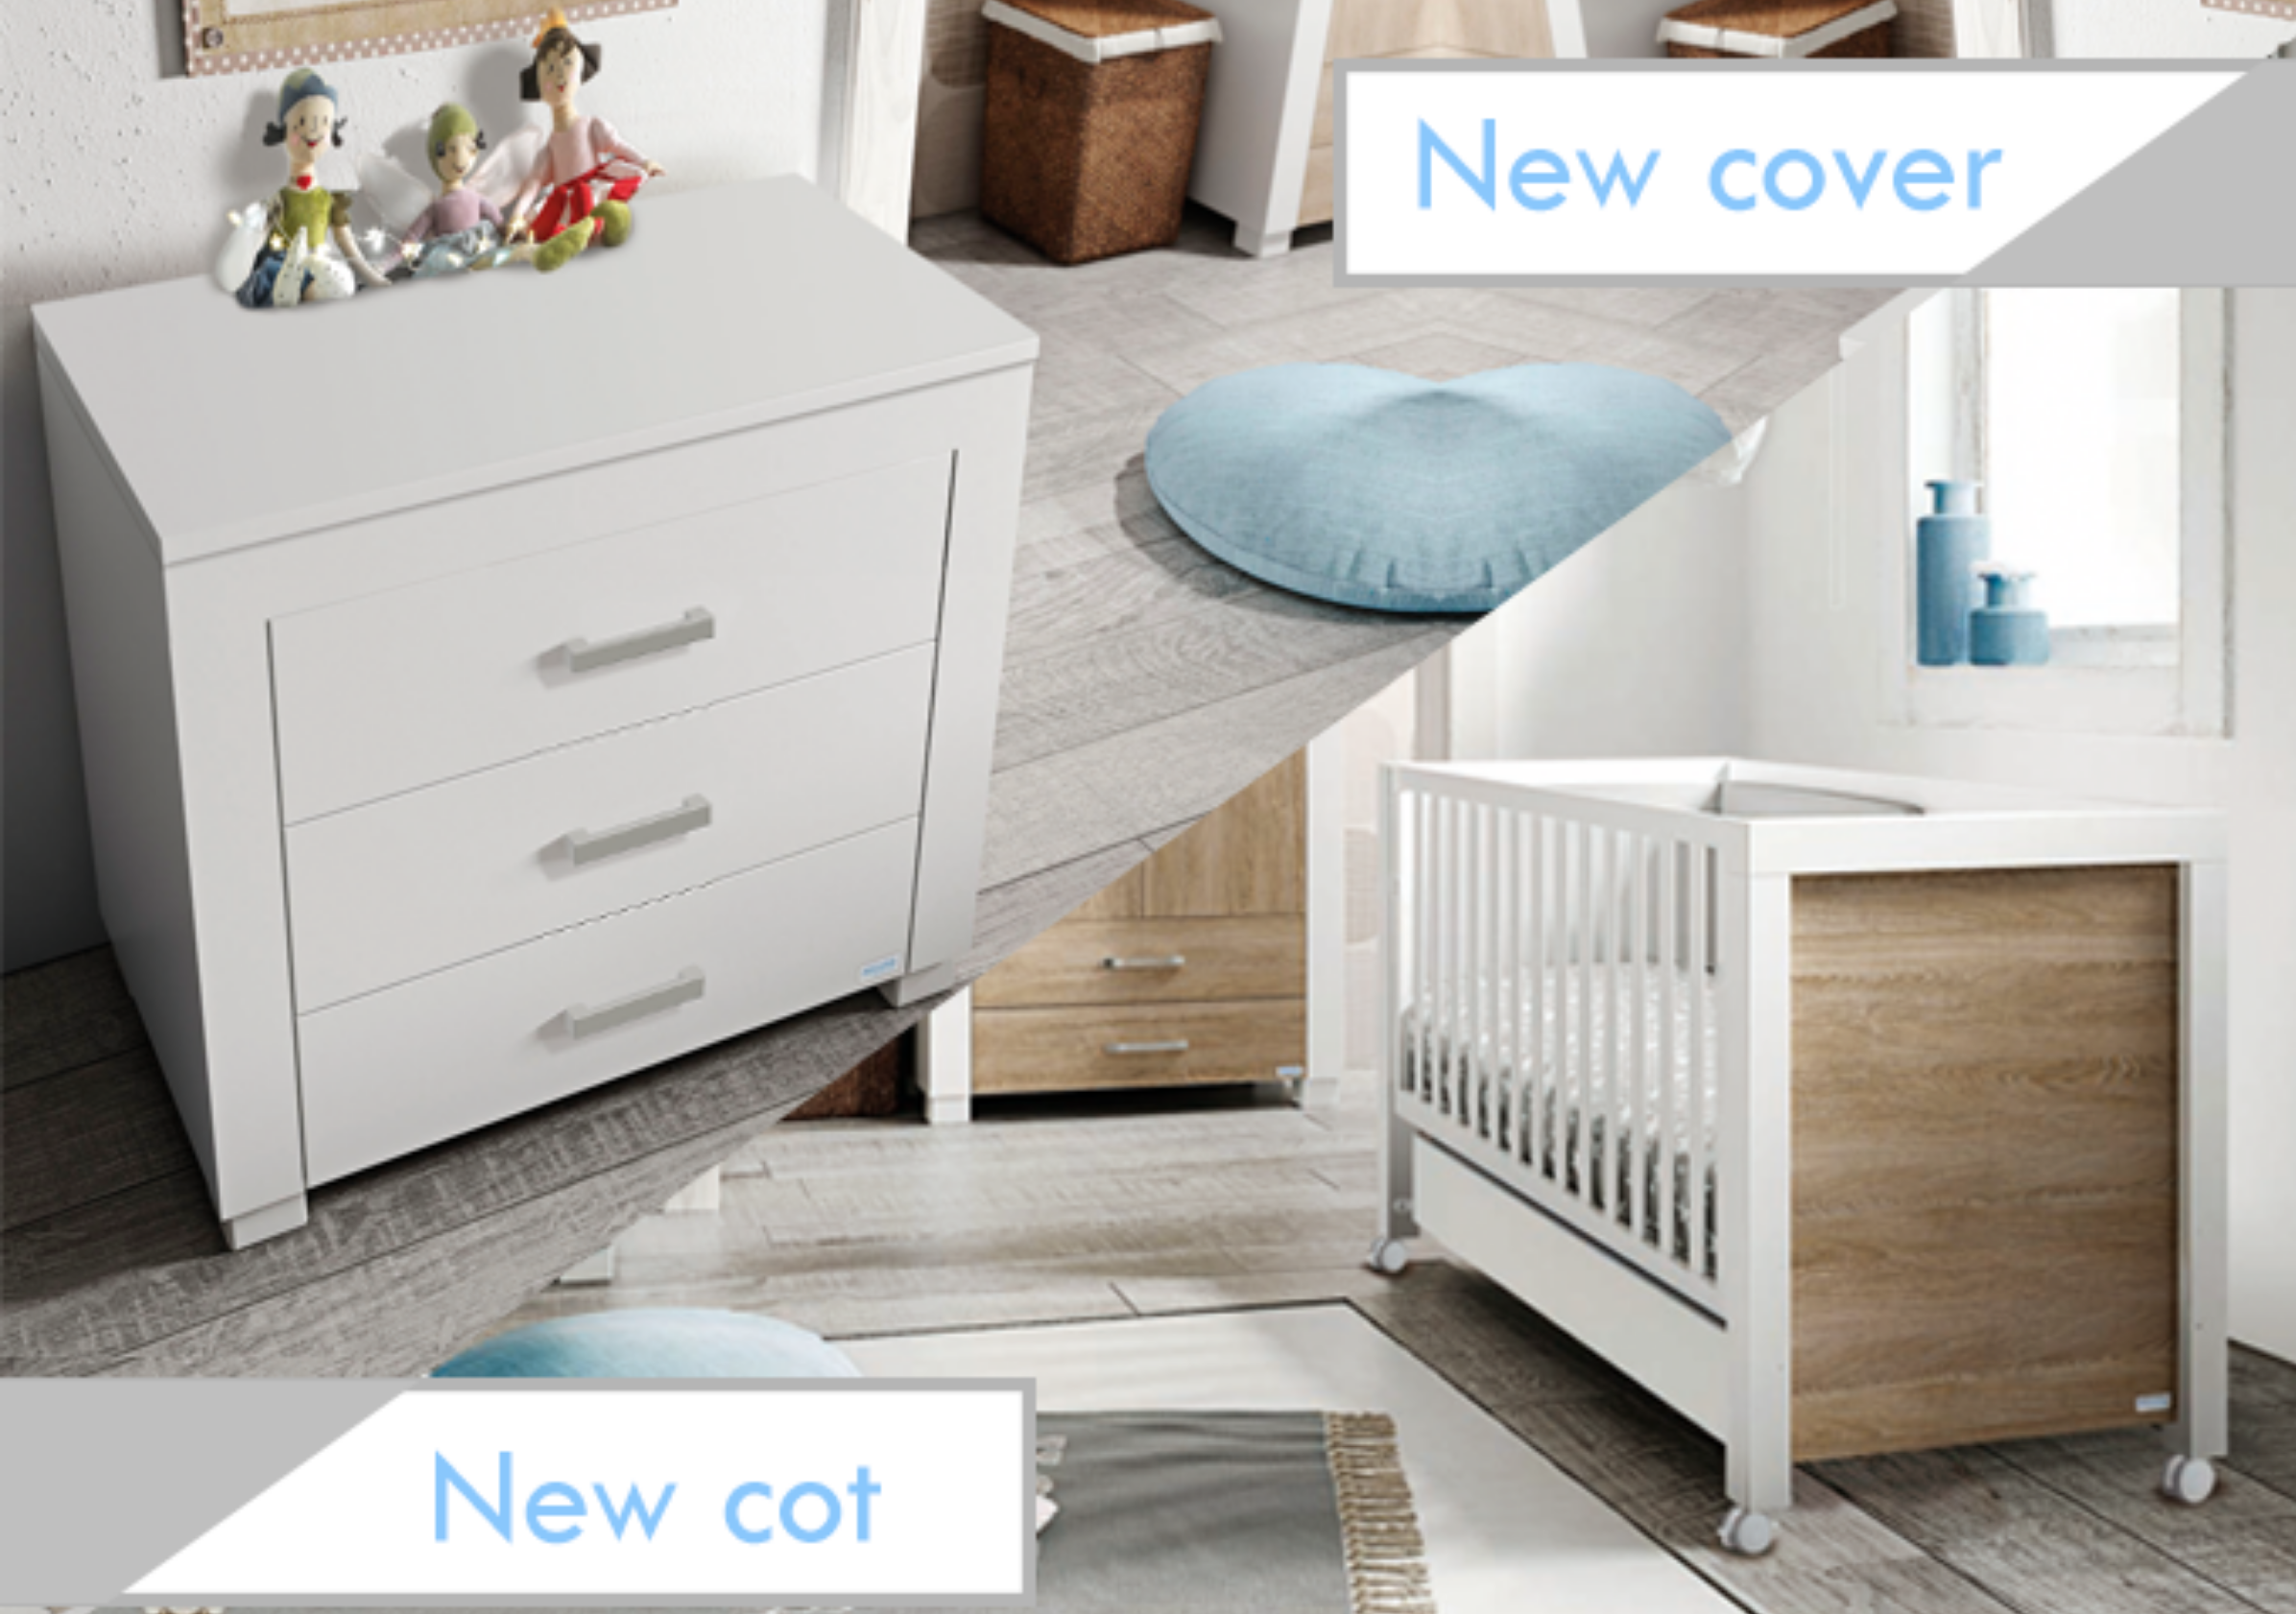 DUKE Collection: New cot and new cover 4408 Micuna